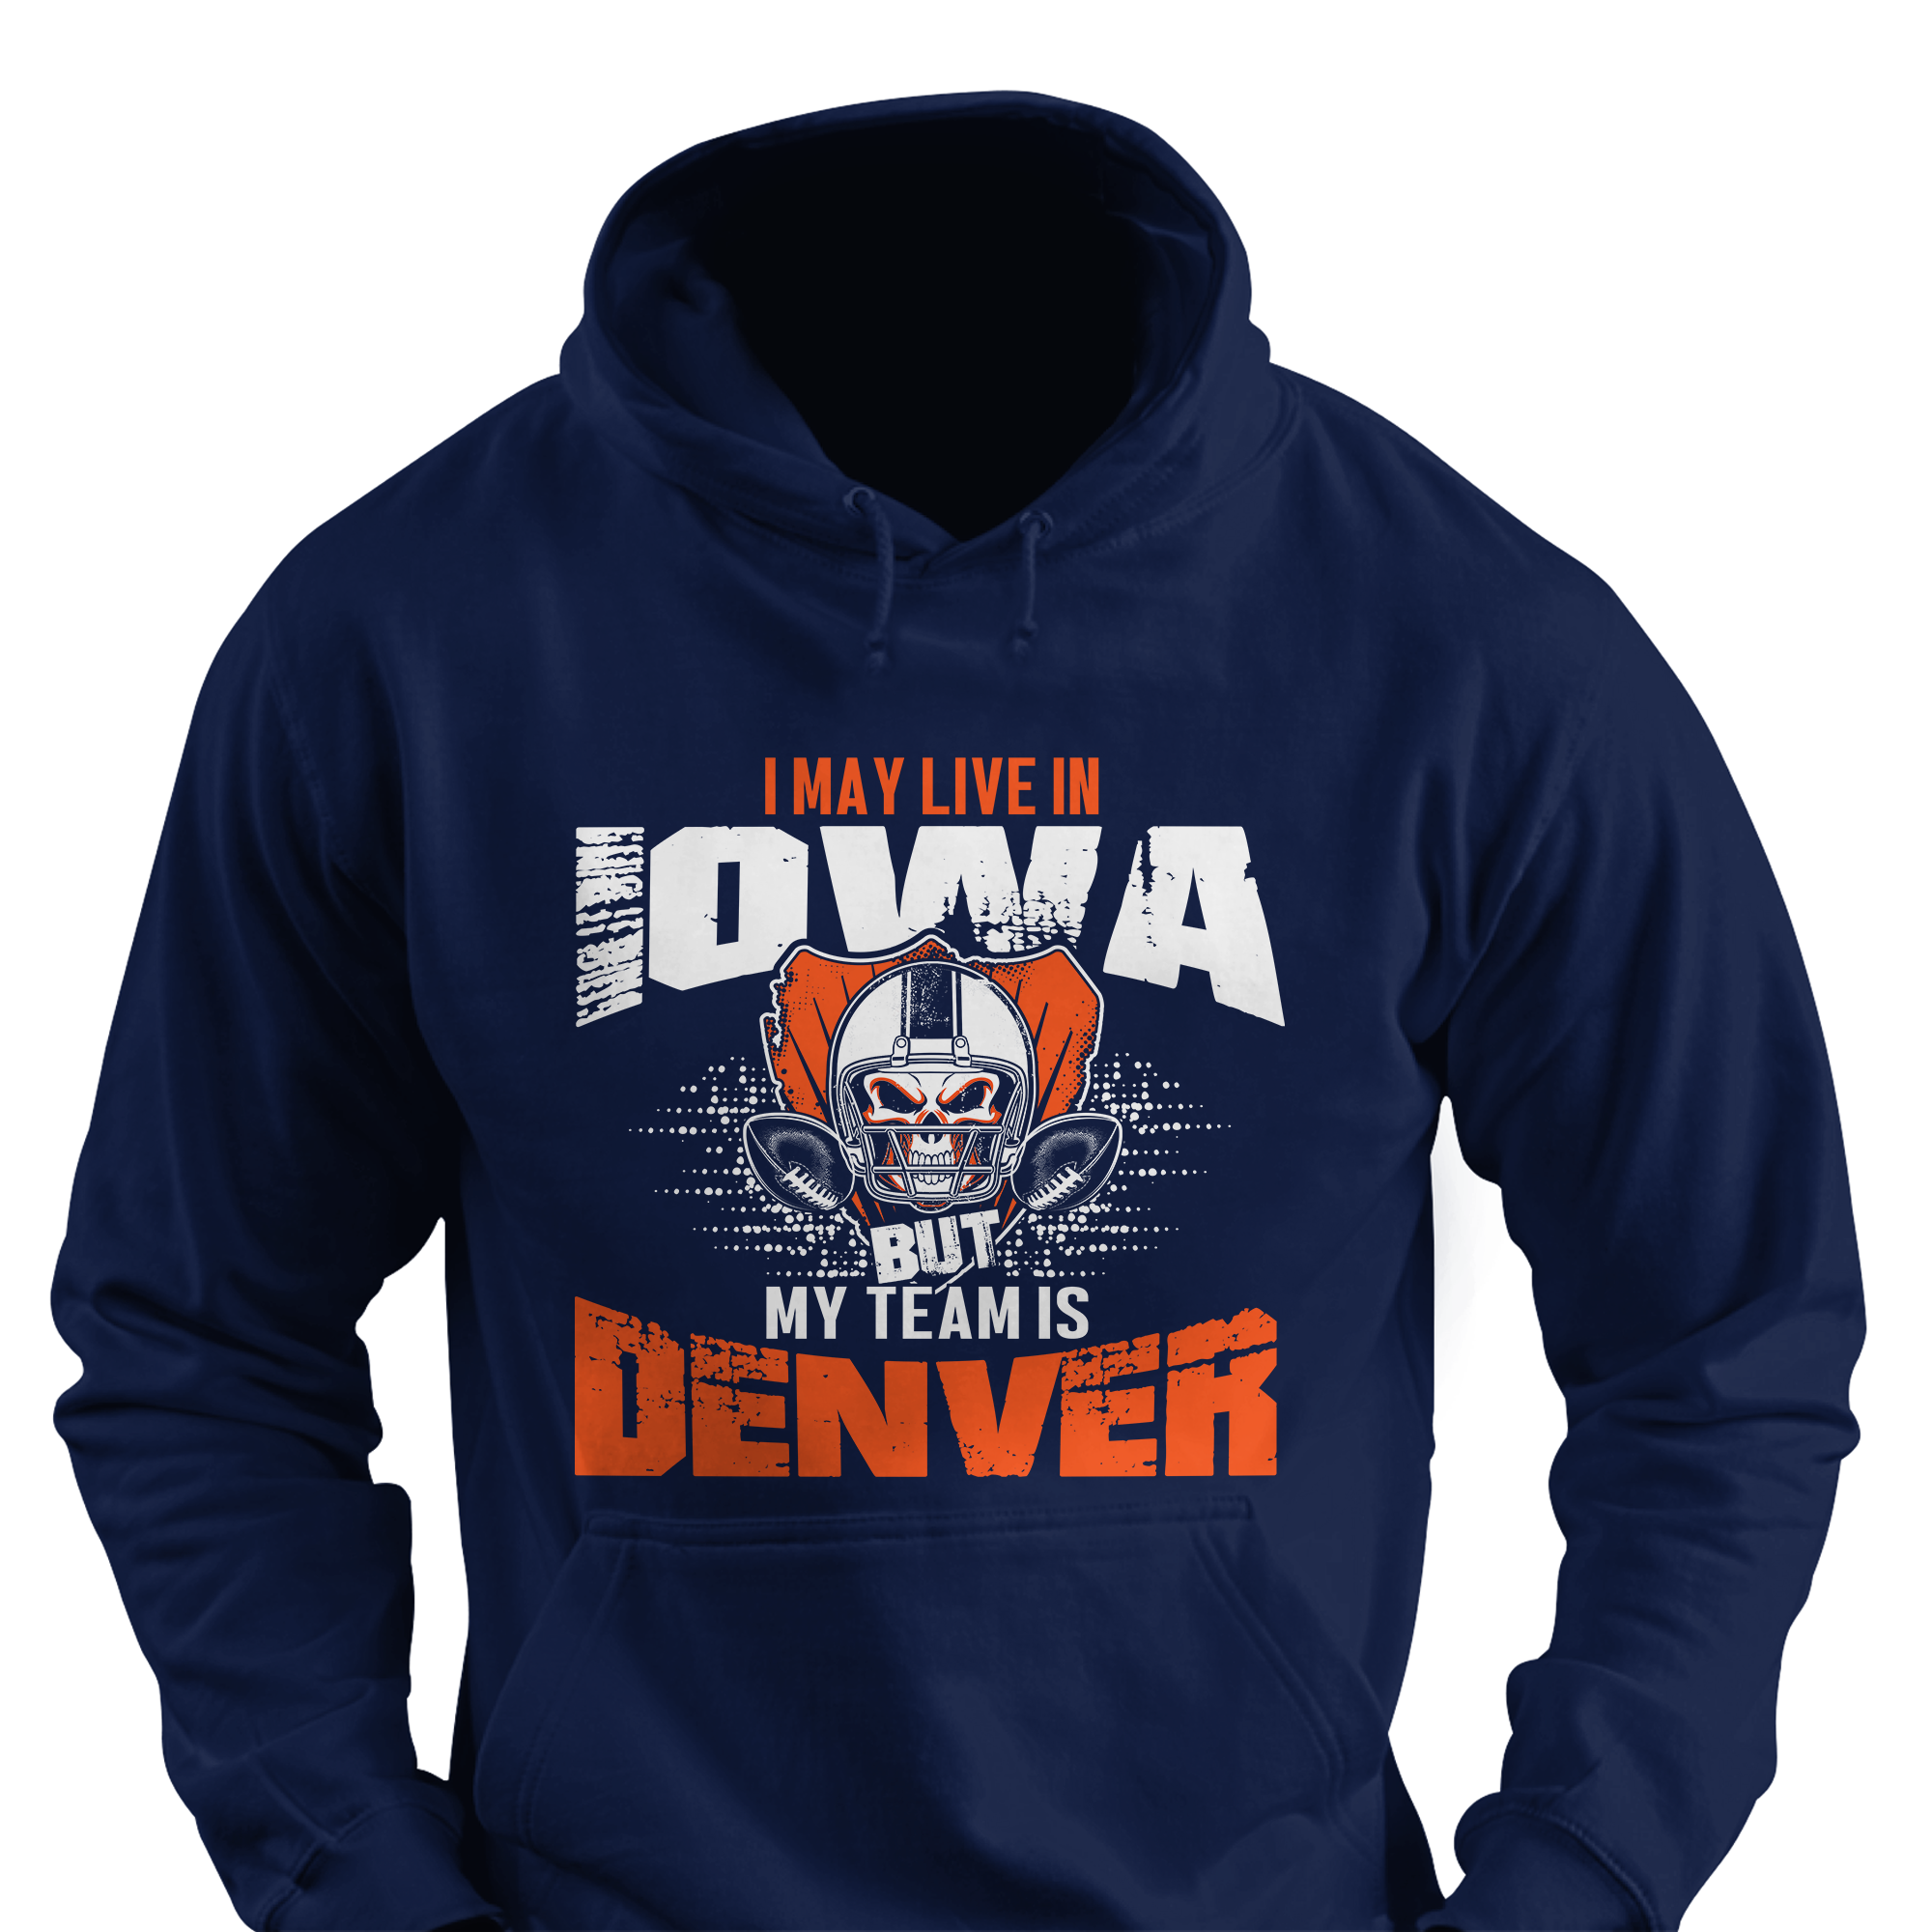 I May Live in Iowa but My Team is Denver